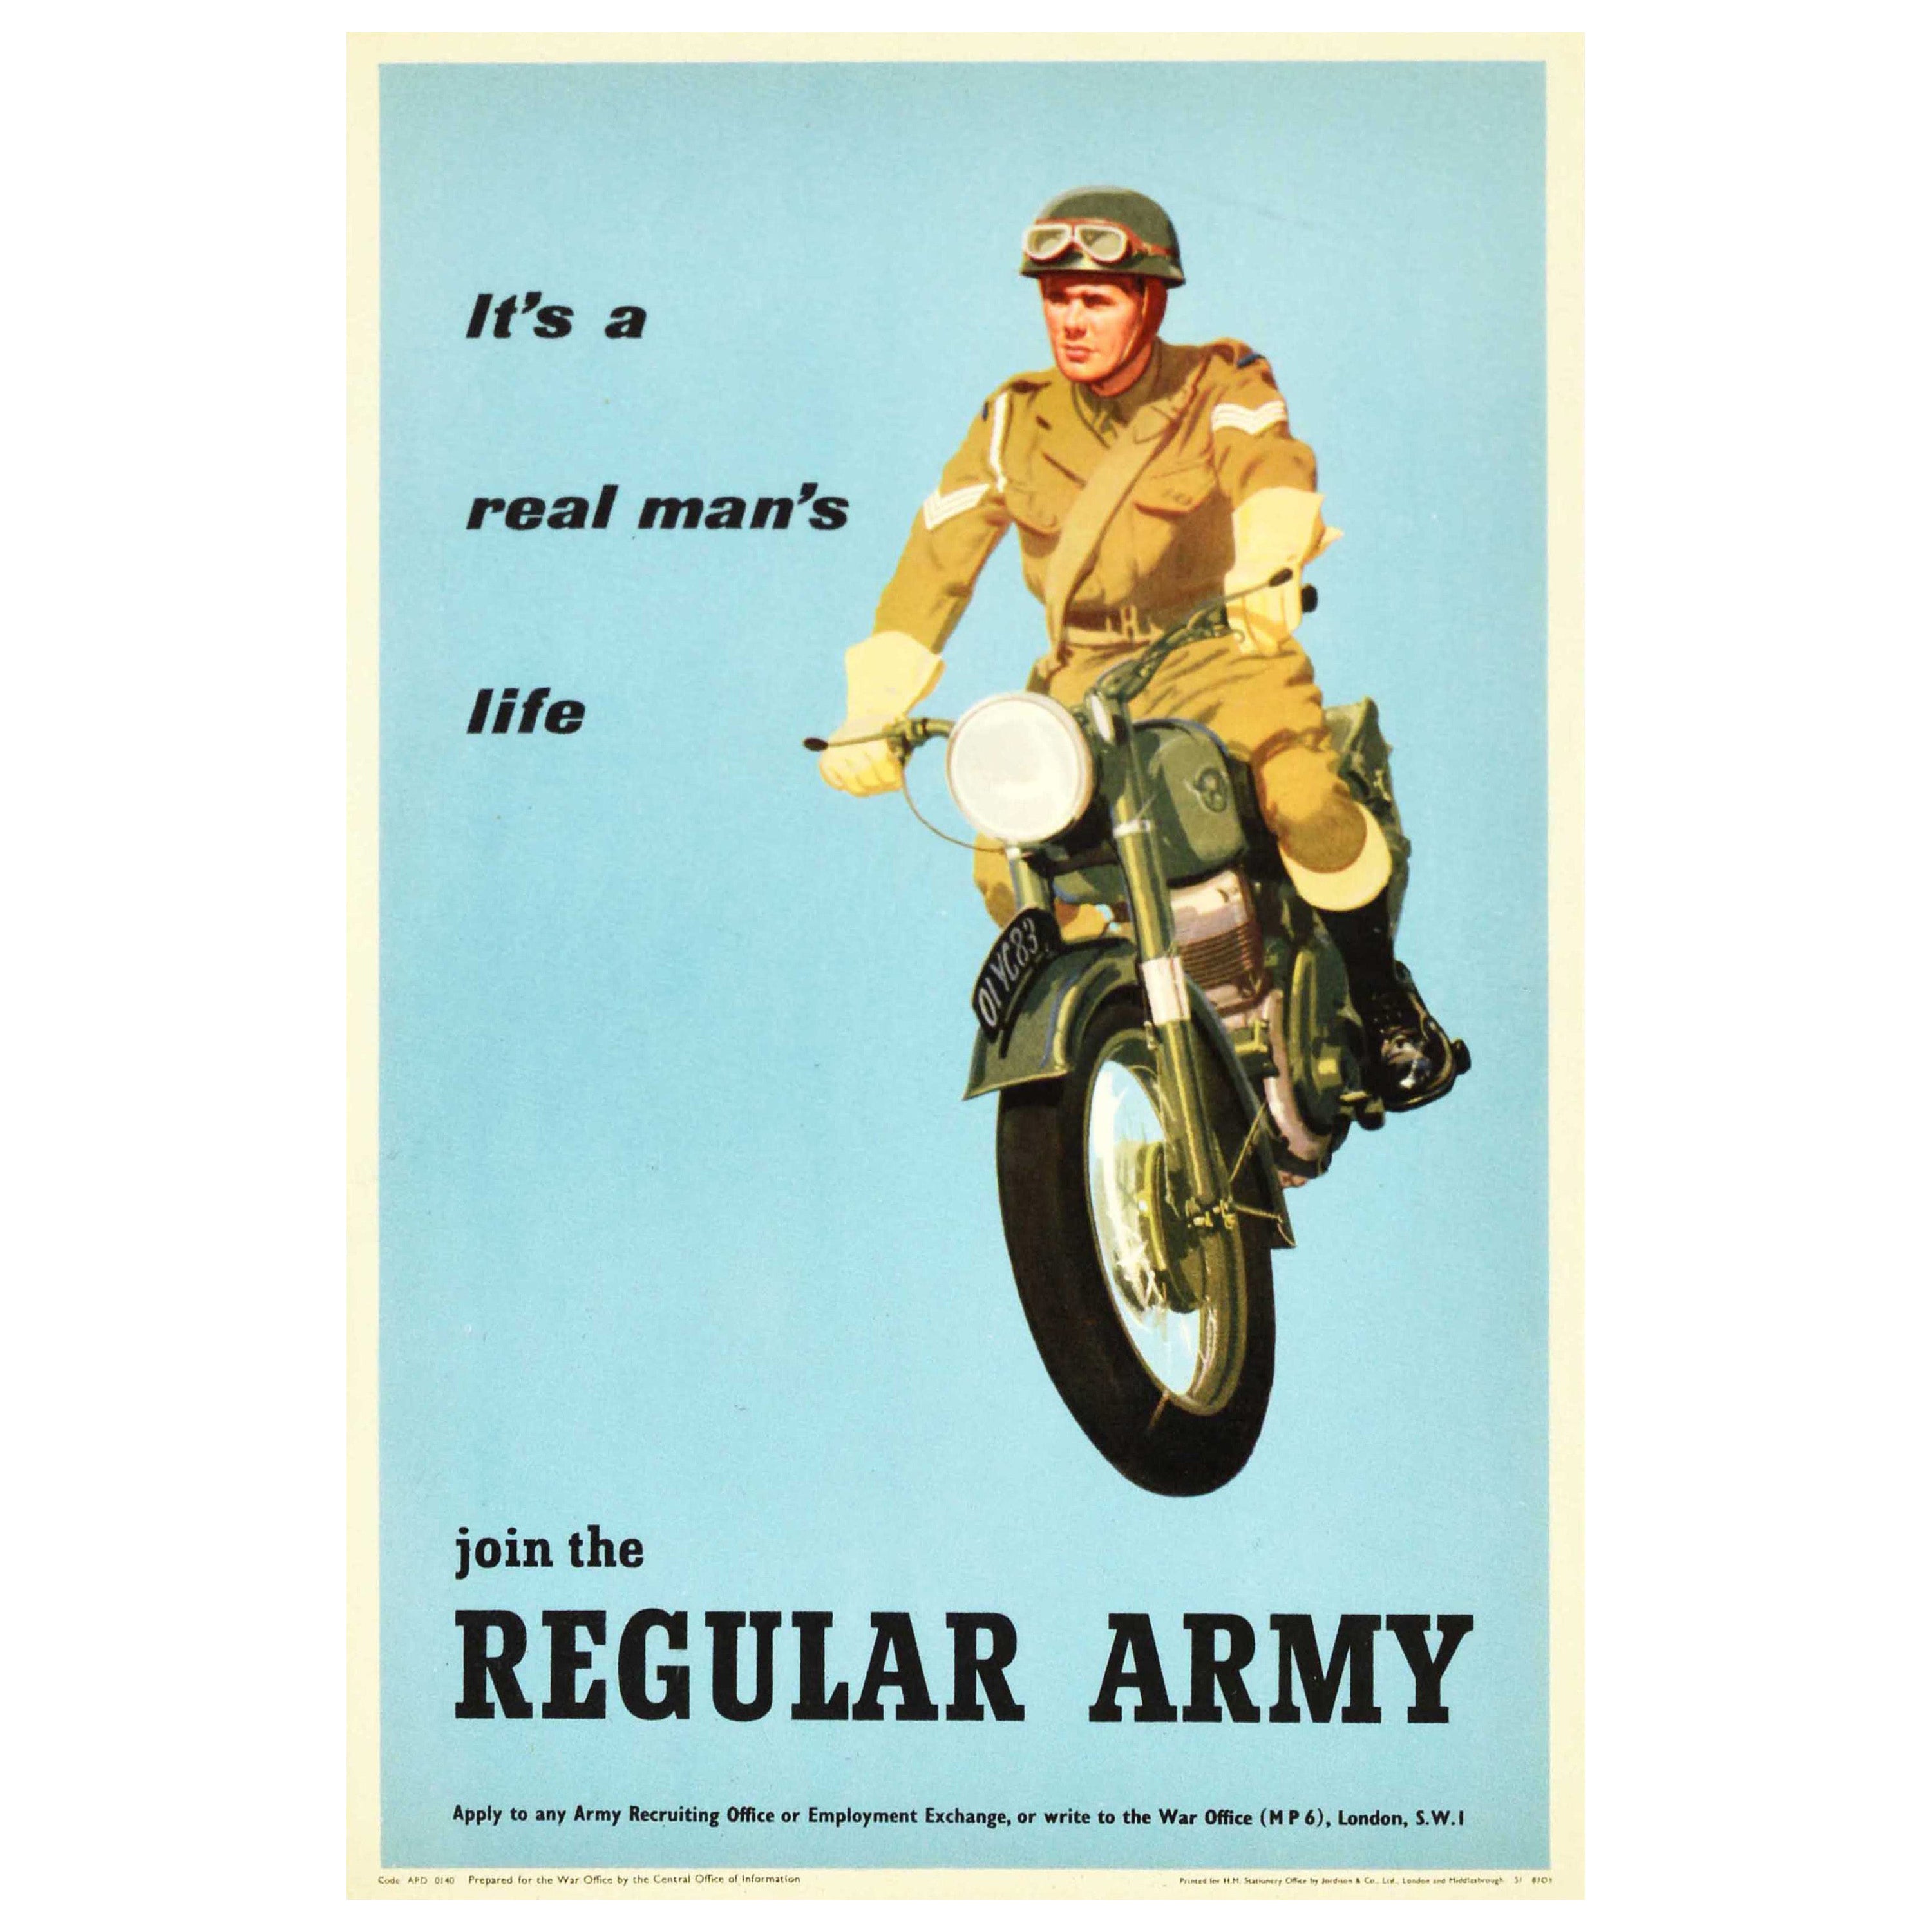 Original Vintage Military Poster Join The Regular Army Real Man's Life Motorbike